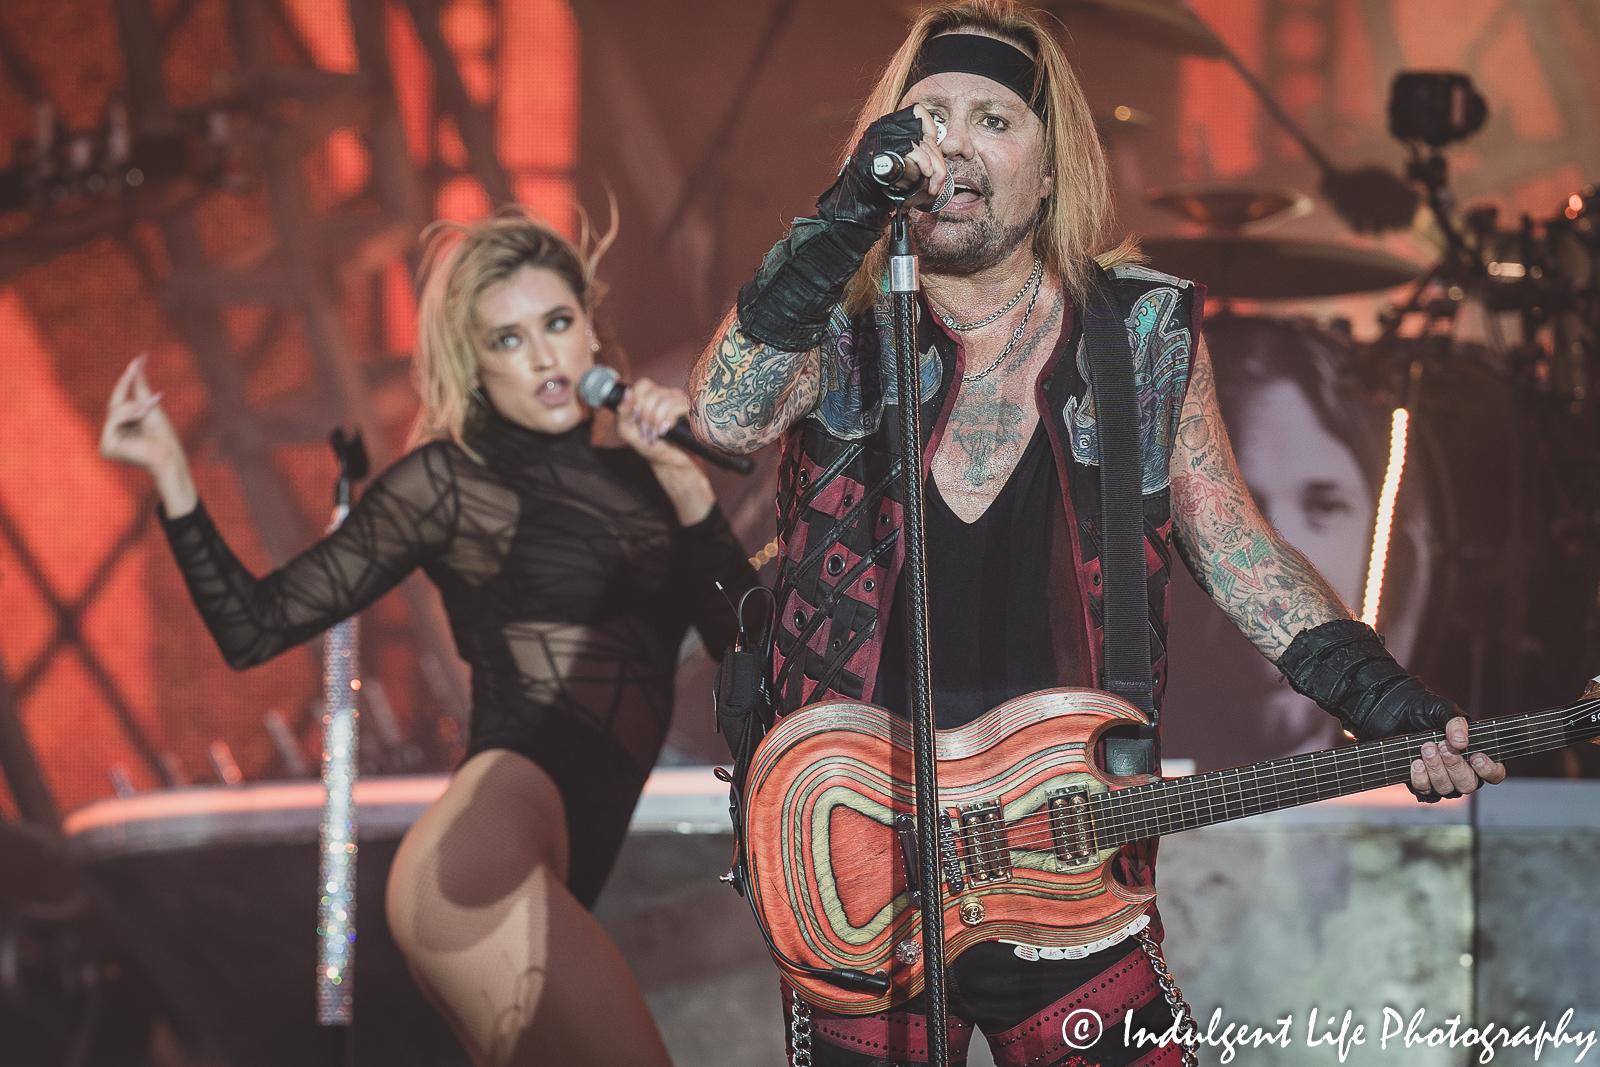 Vince Neil fronting Mötley Crüe live in concert during the stadium tour stop at Kauffman Stadium in Kansas City, MO on July 19, 2022.